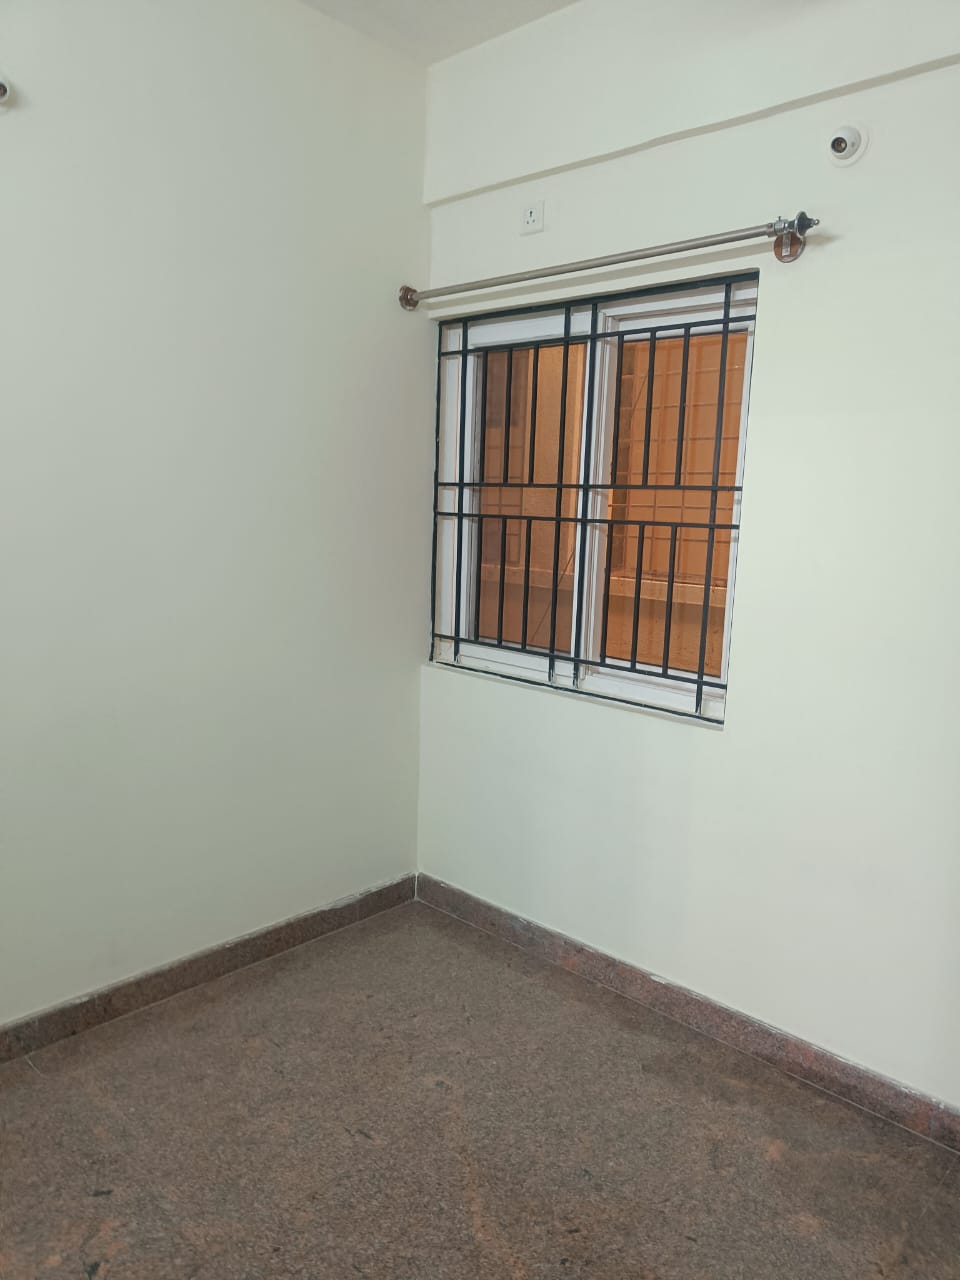 2 BHK Independent House for Lease Only at JAML2 - 2172 in Sultanpalya